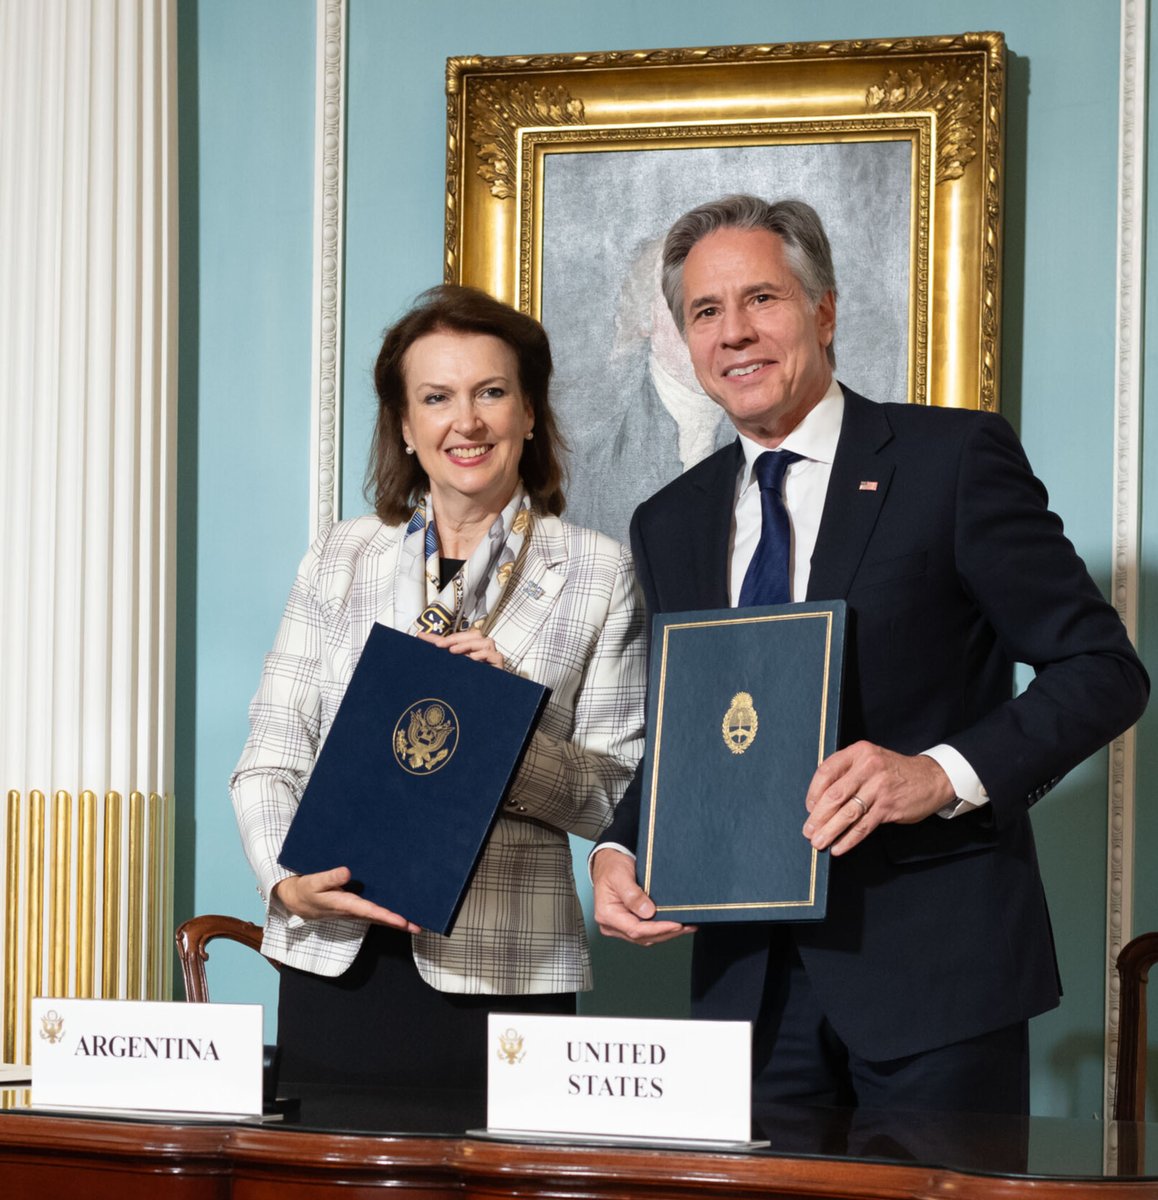 Met with Foreign Minister @DianaMondino to reaffirm our close ties with Argentina and cooperation on democracy & human rights in the Western Hemisphere and beyond. We signed a Framework of Understanding to re-establish an annual High-Level Dialogue to further our work together.